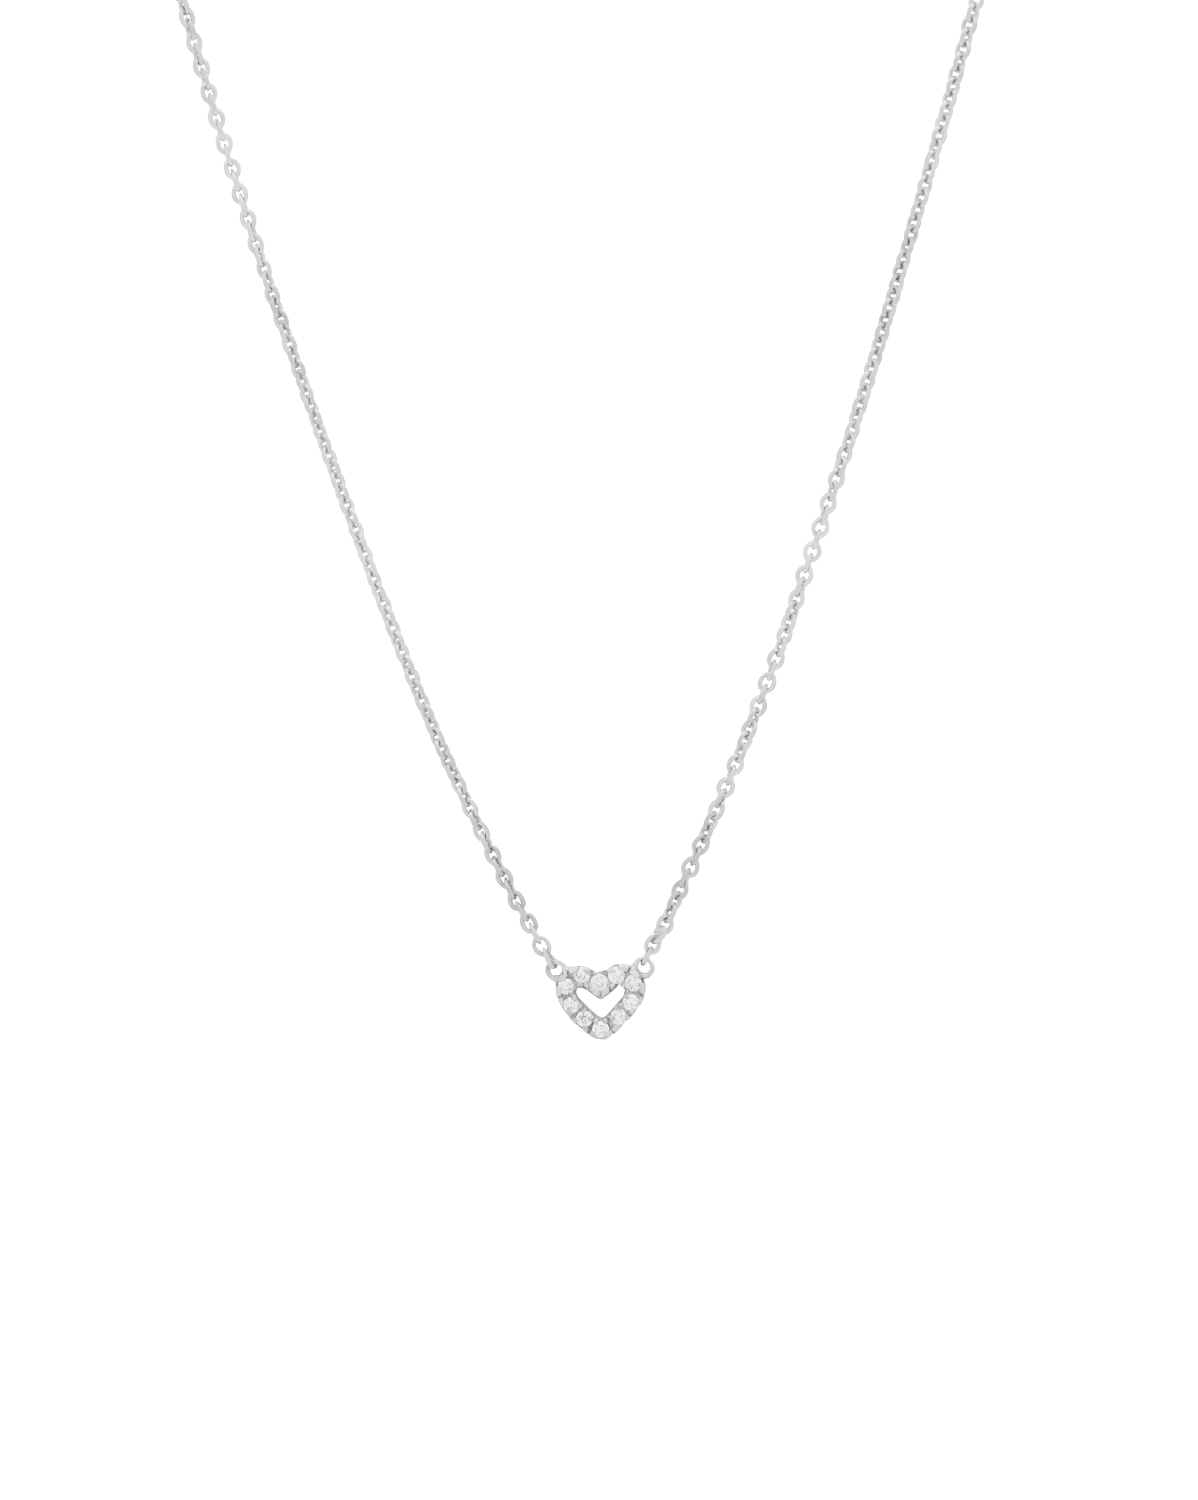 Solid Gold Diamond Heart Necklace - White Gold